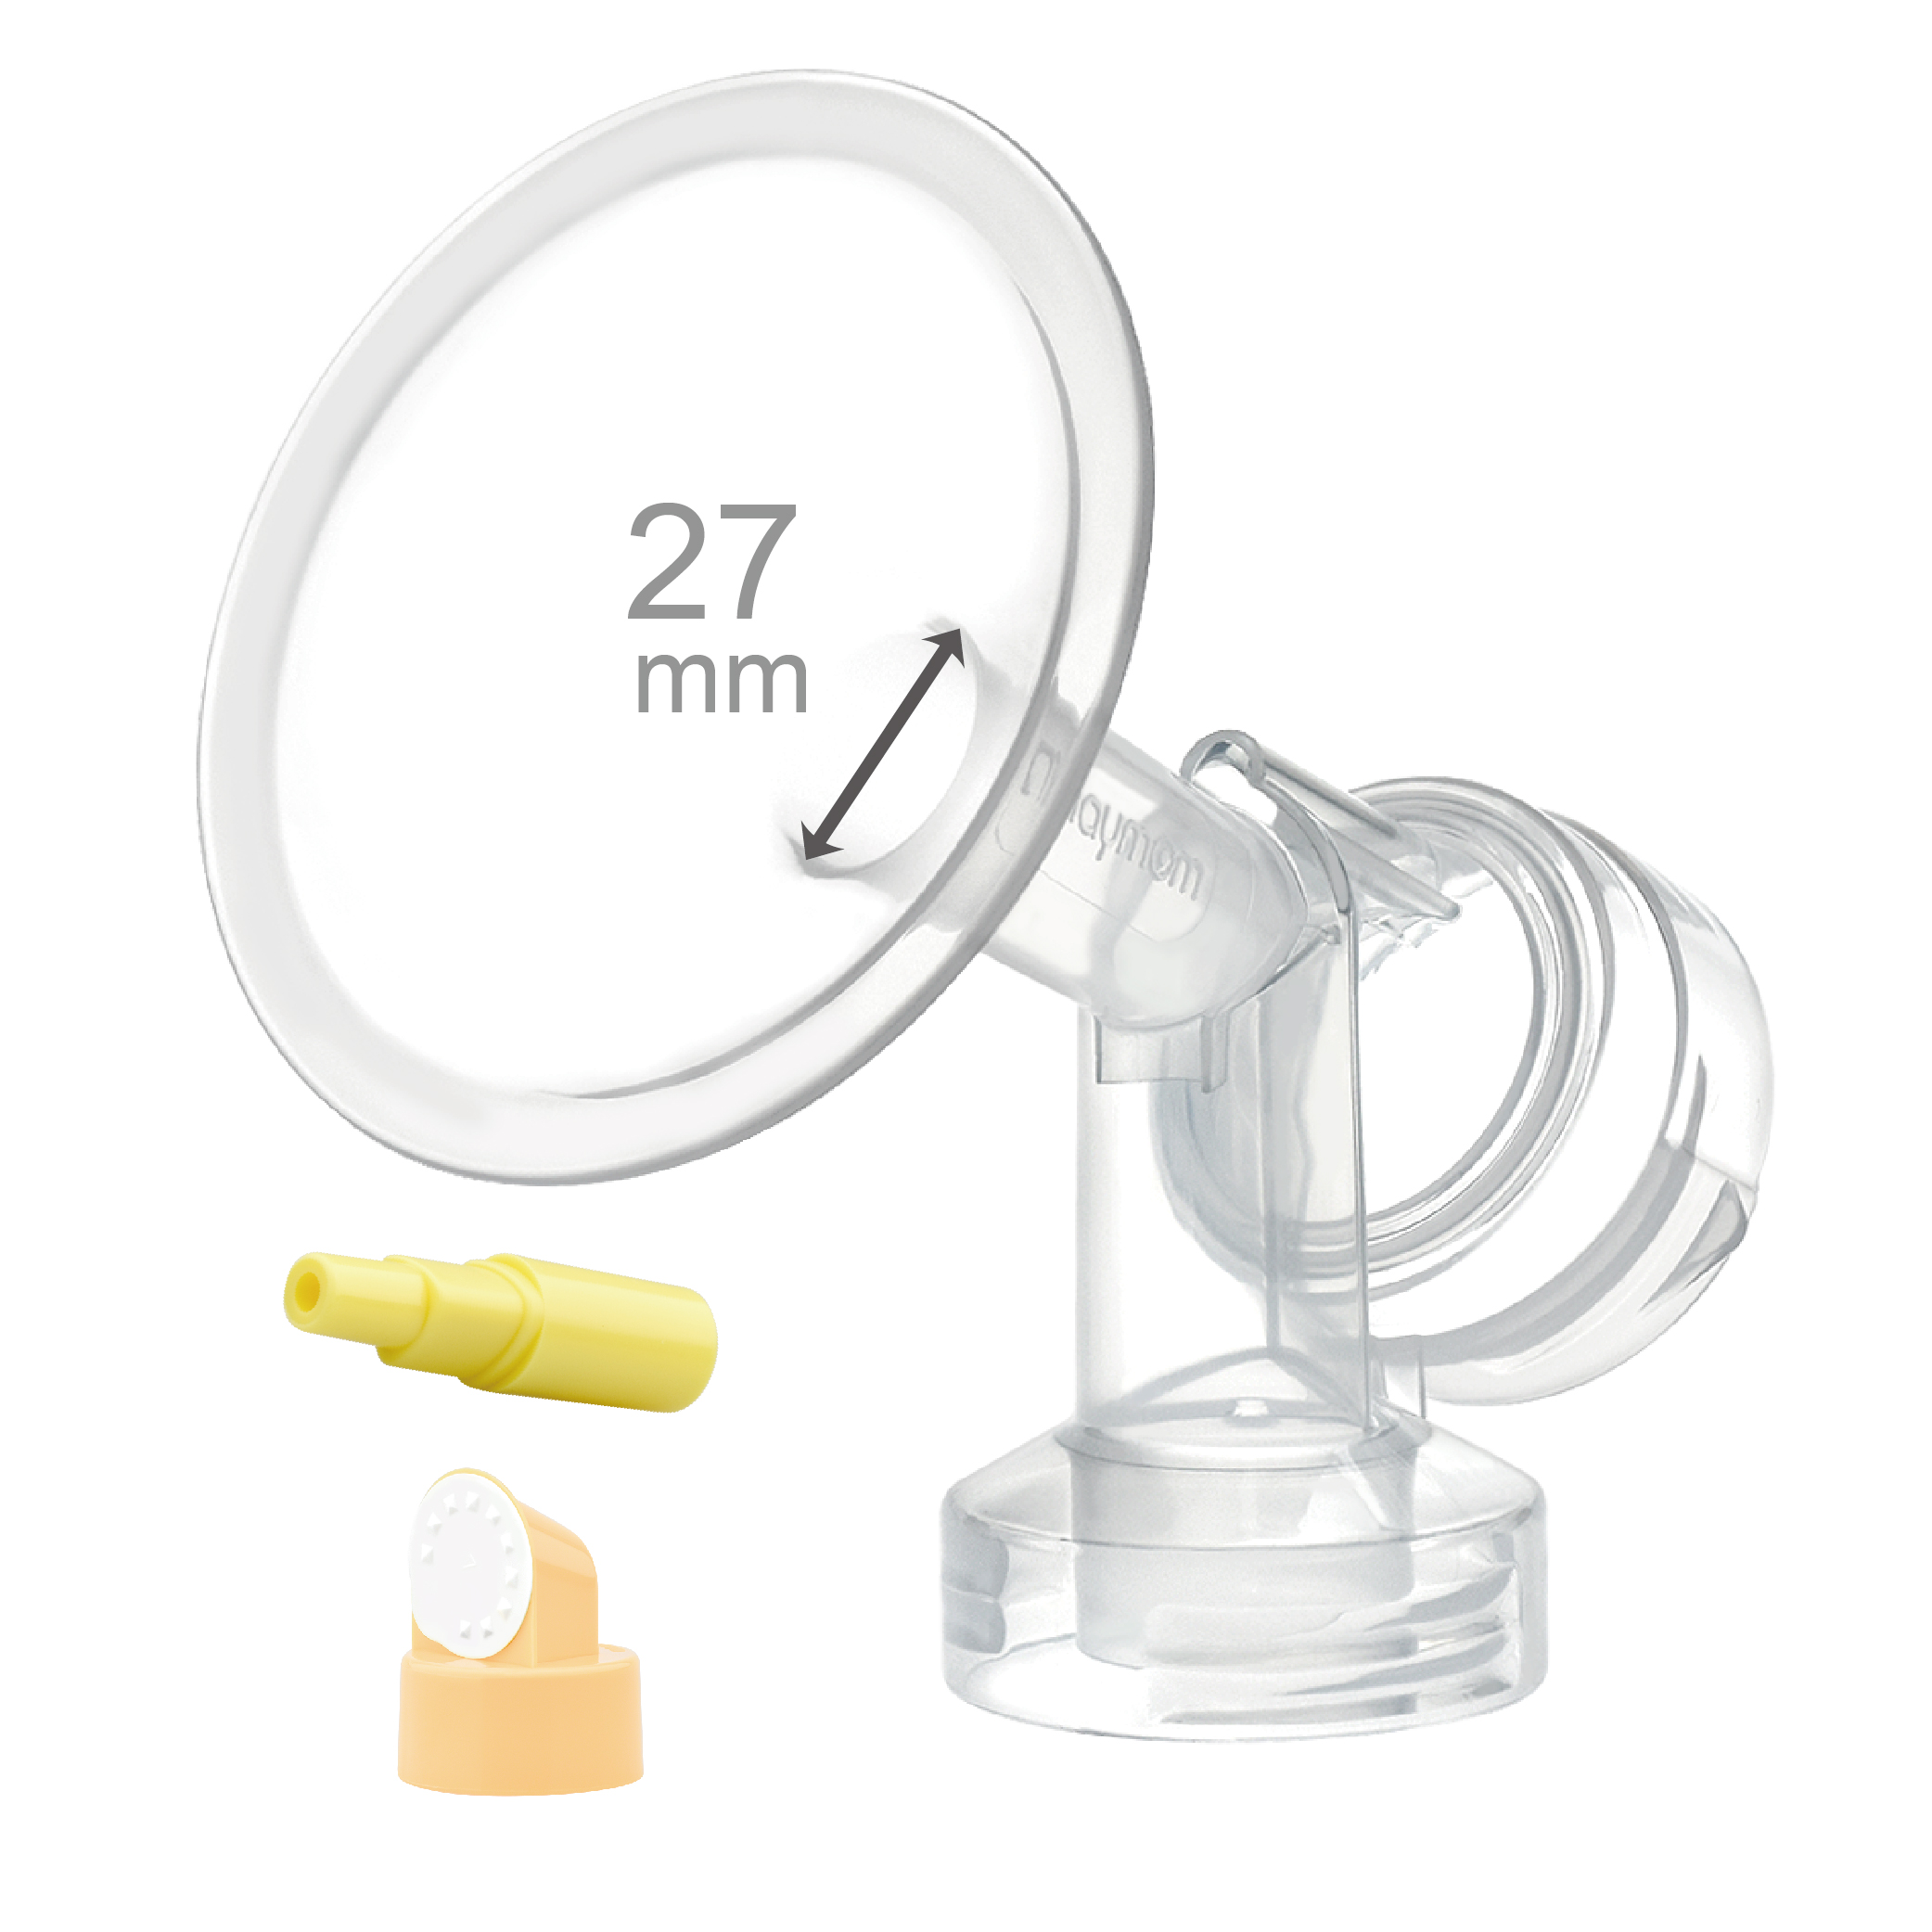 27 mm Extra Small Flange w/ Valve and Membrane for SpeCtra Breast Pumps S1, S2, M1, Spectra 9; Narrow (Standard) Bottle Neck;